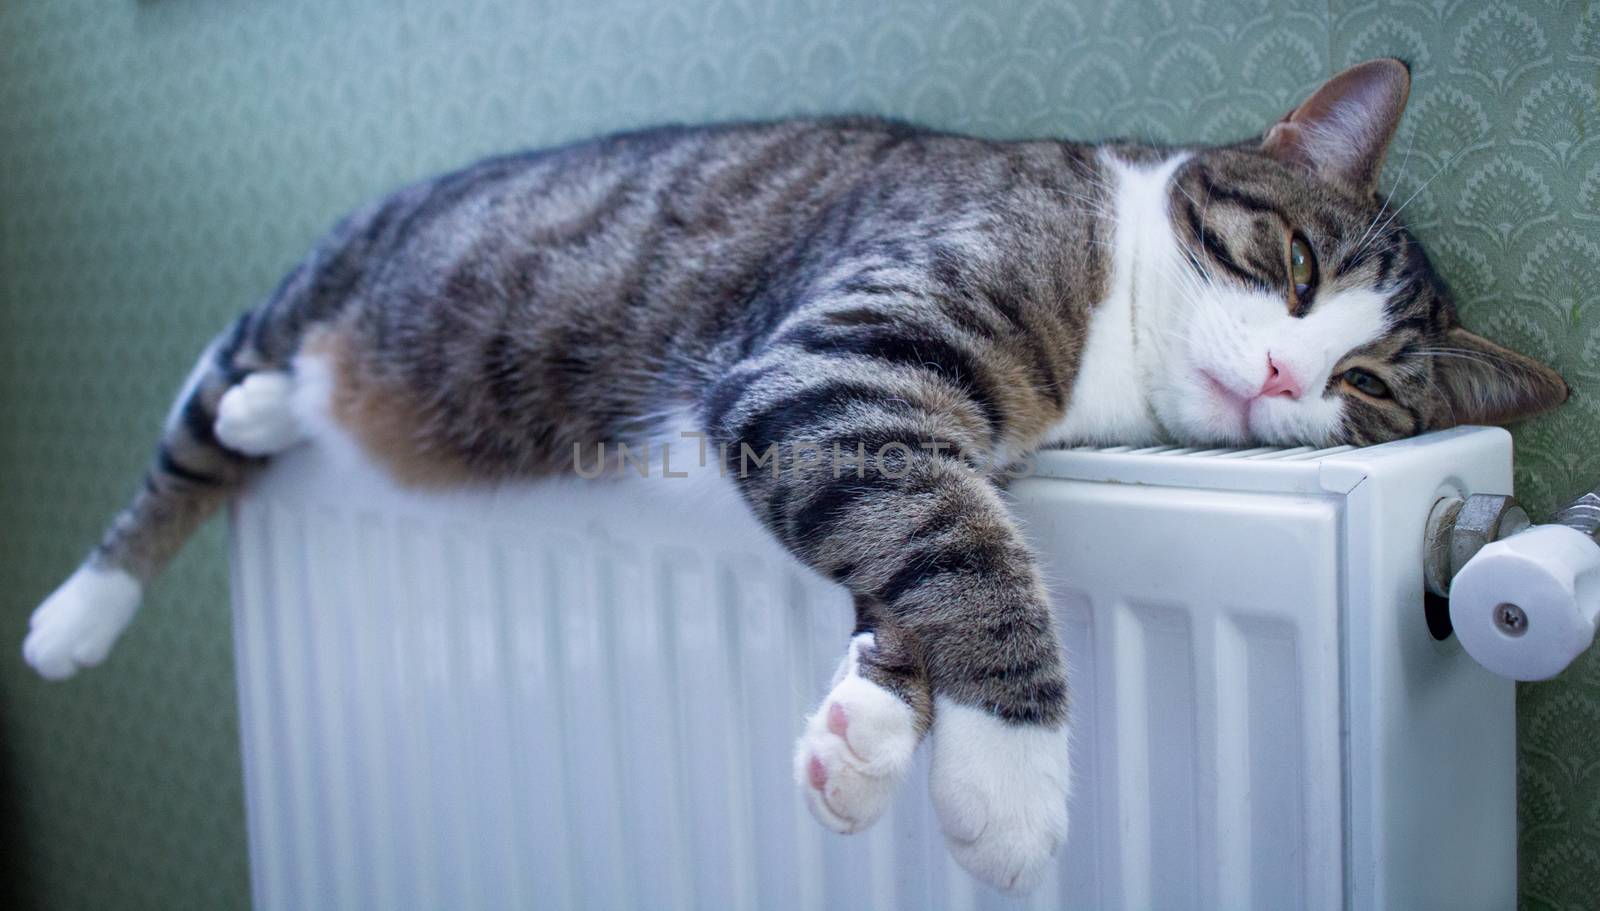 Furry striped pet cat lies on warm radiator relaxing by VeraVerano